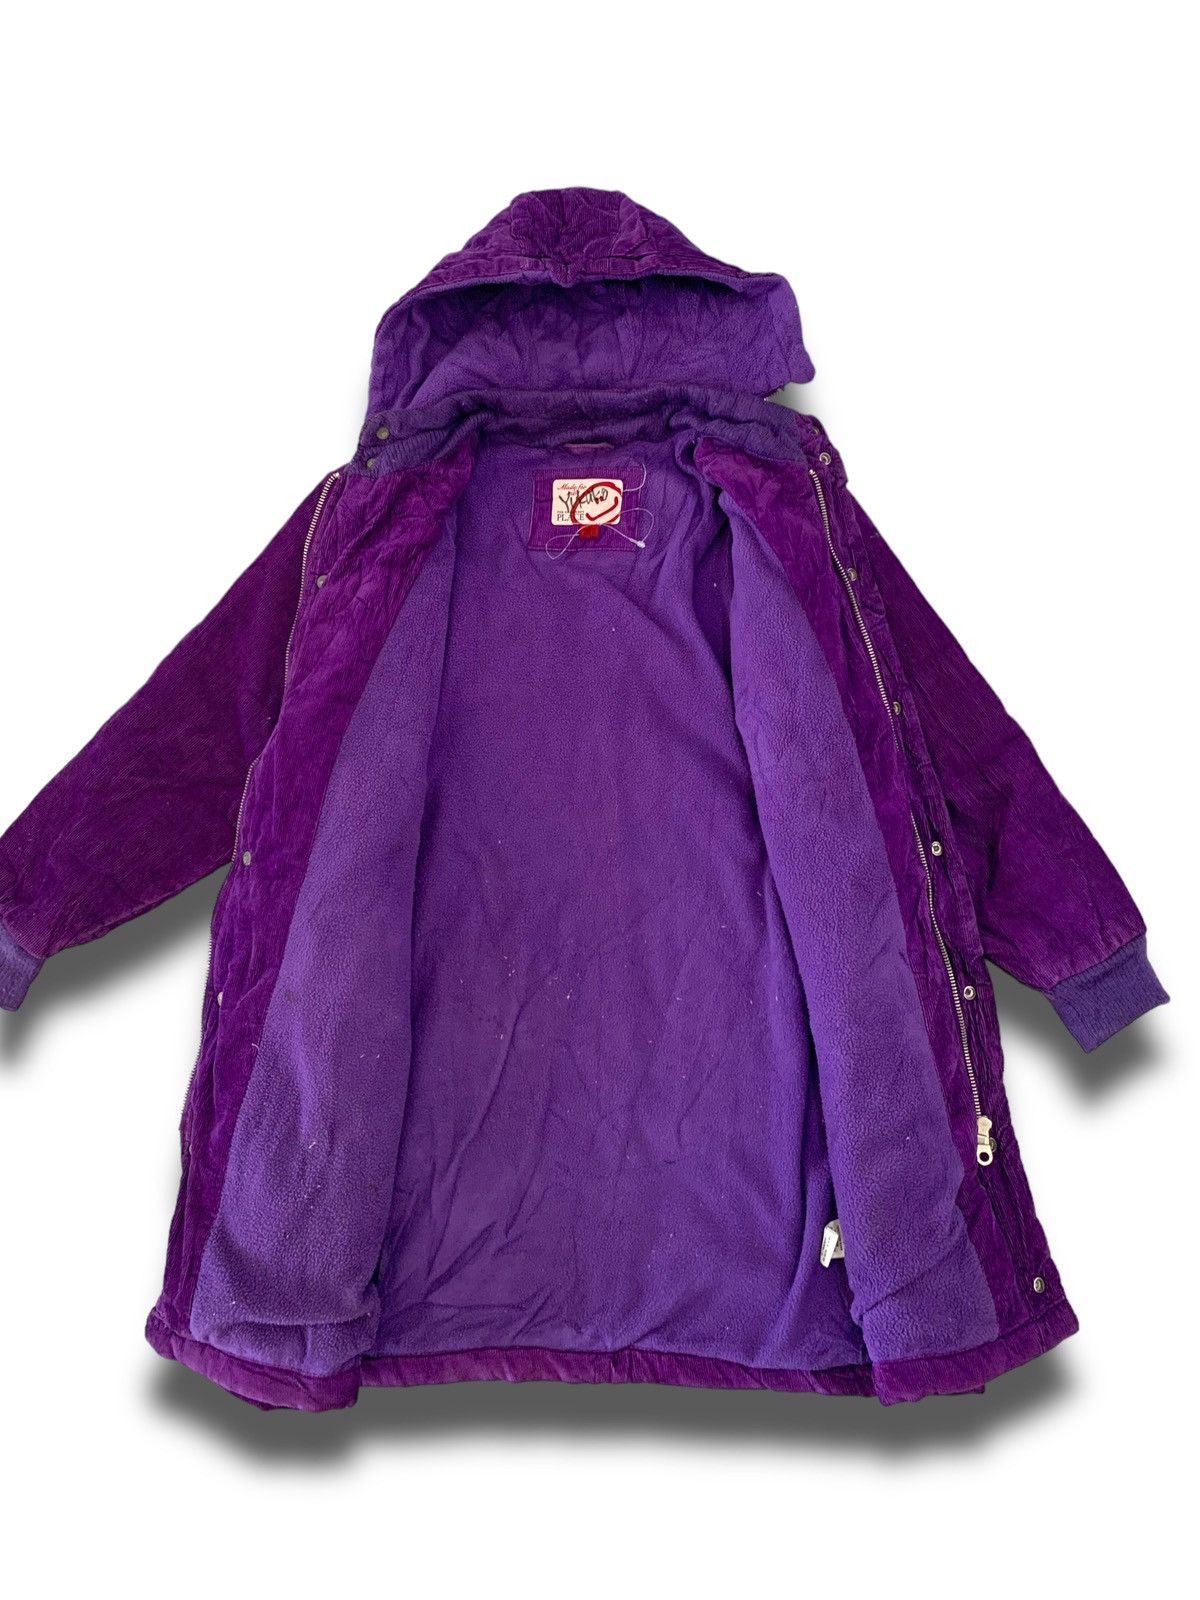 Archival Clothing Archival The Children’s Place Japanese Jacket Size L / US 10 / IT 46 - 5 Thumbnail